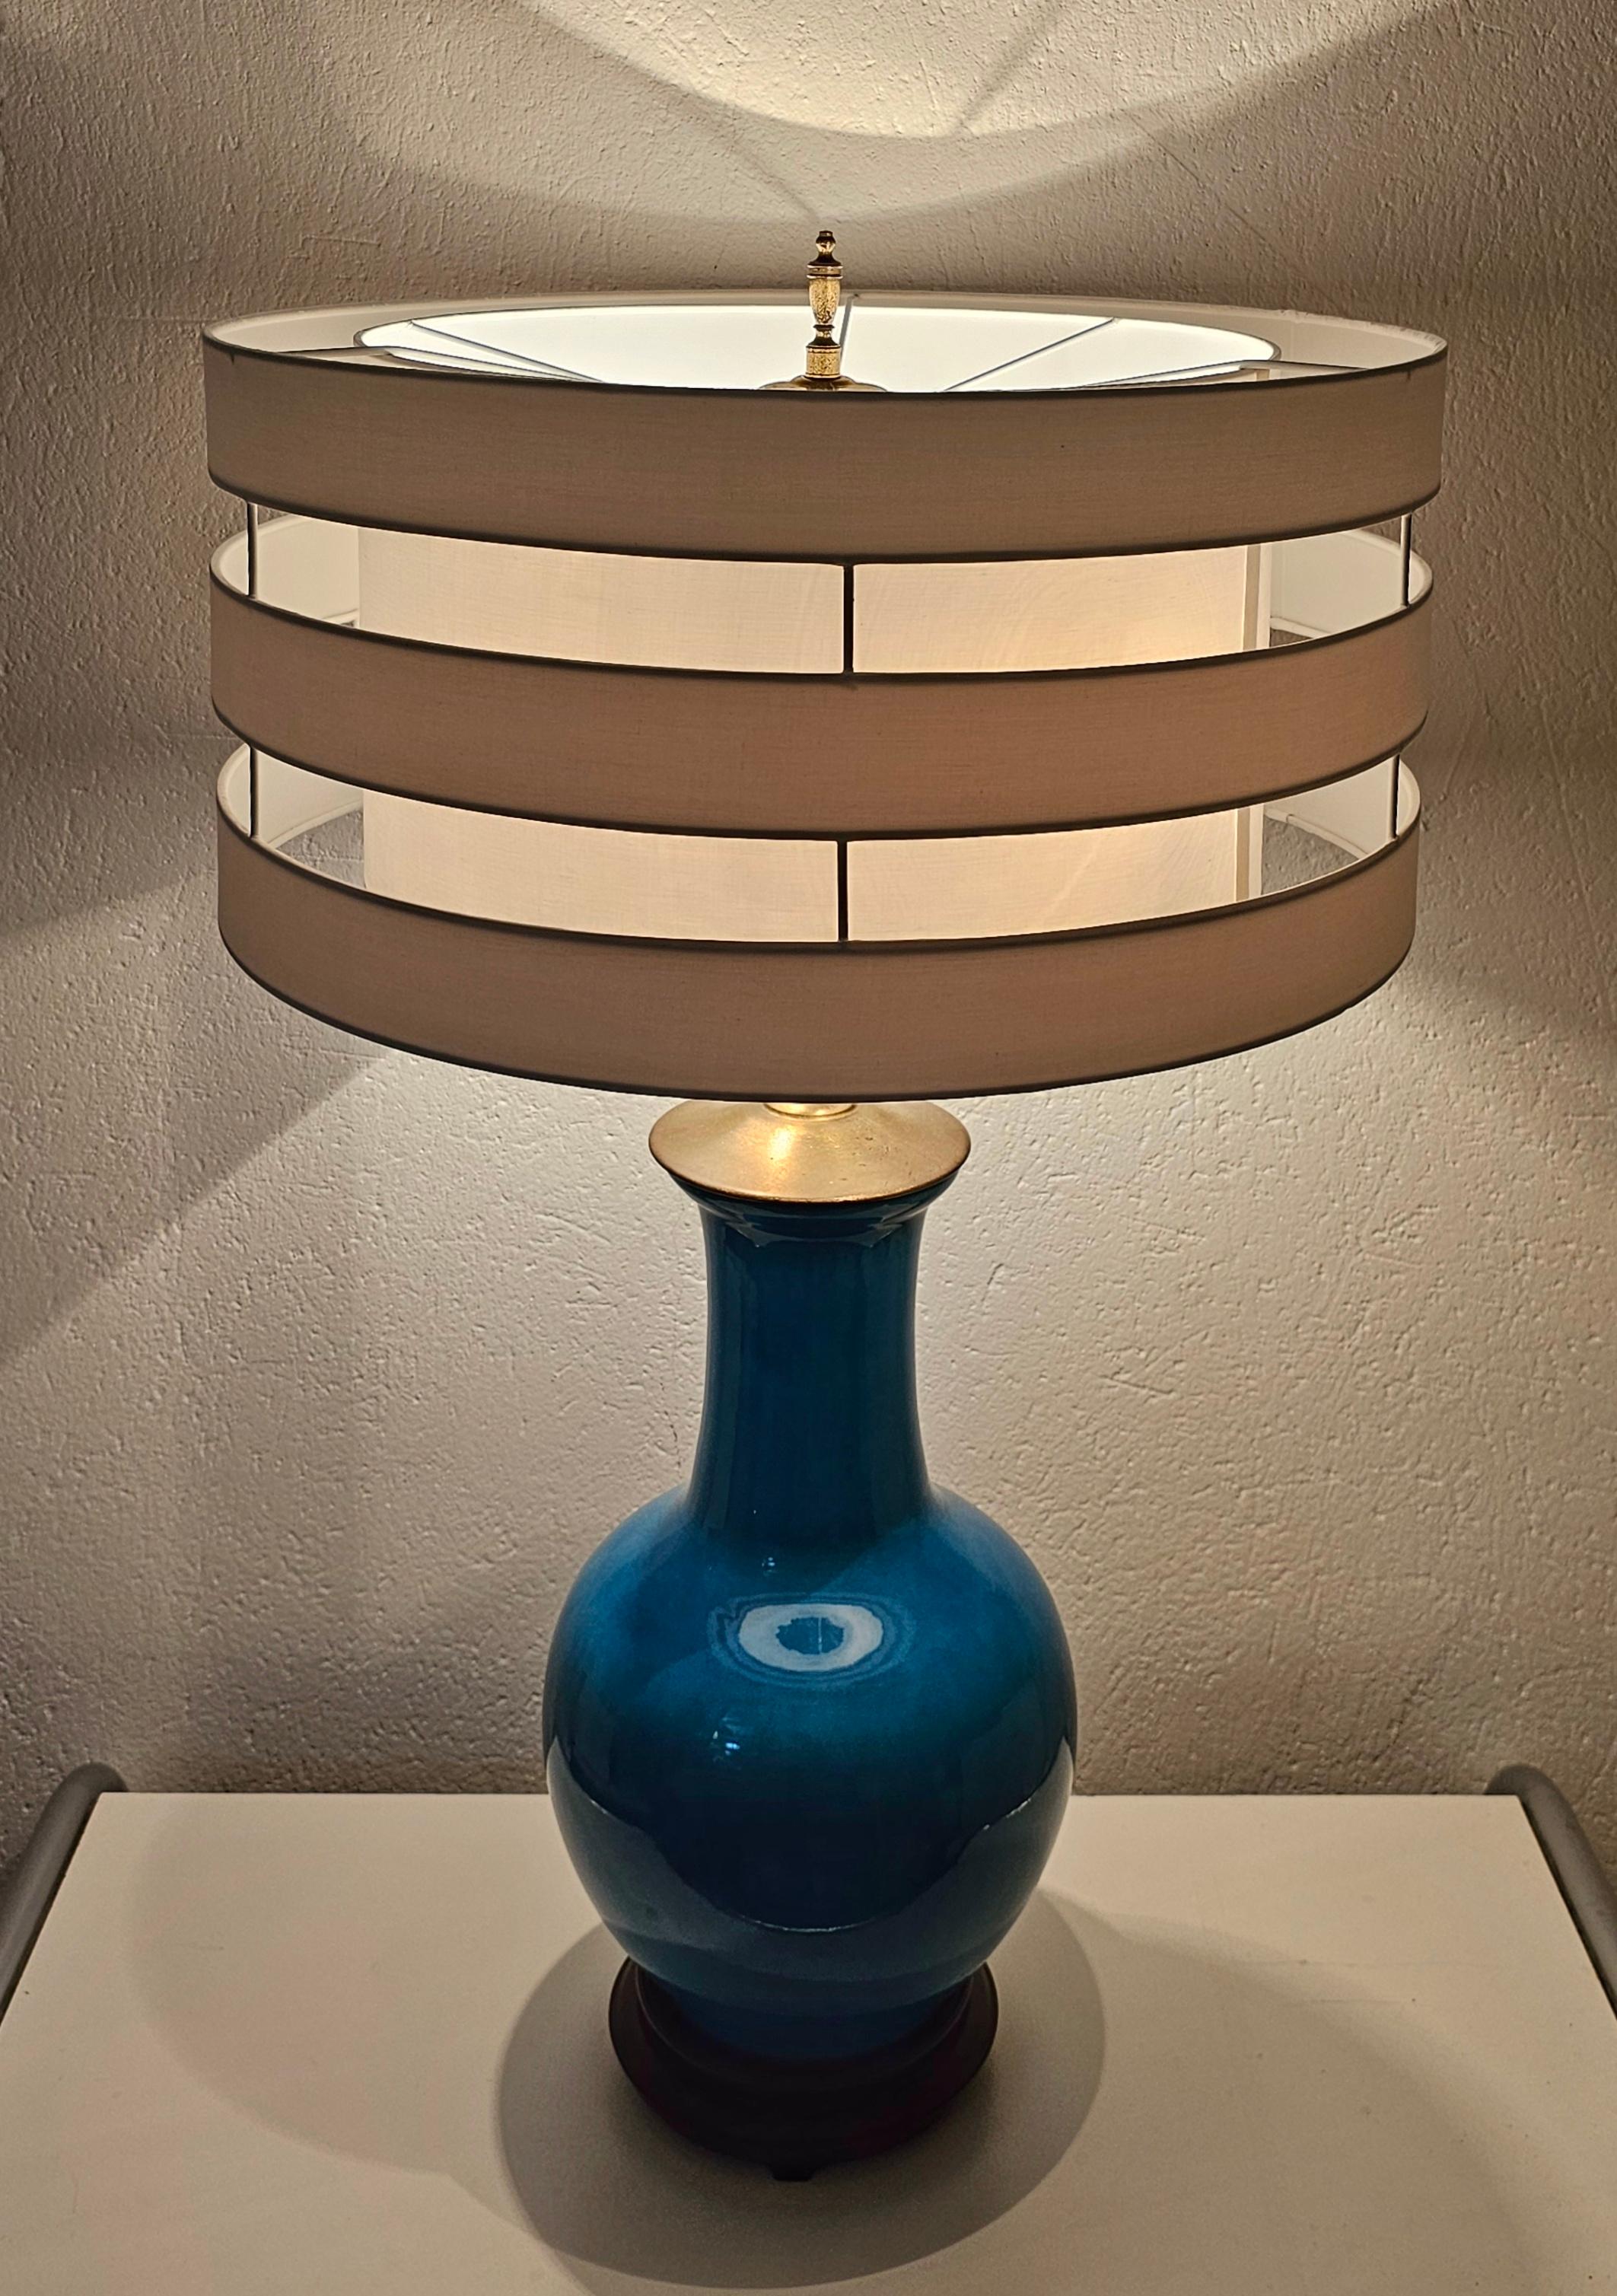 In this listing you will find a rare and large Mid Century Modern table lamp by Warren Kessler New York. The lamp is made in blue ceramics, with mahogany base. It features 2 light bulbs and a large white shade, which is new. Made in the USA in